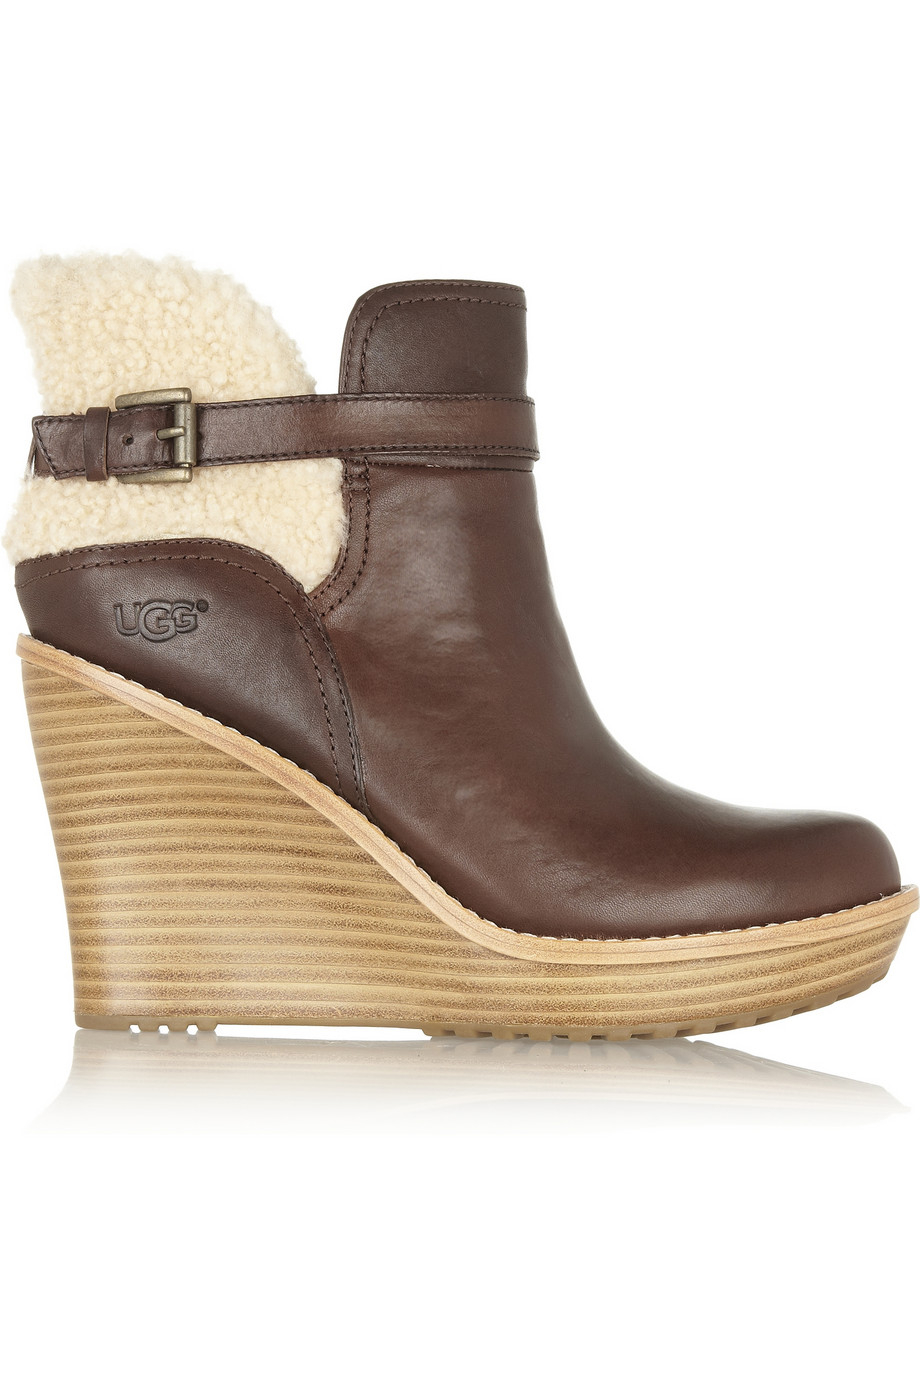 Ugg Anais Shearling And Leather Wedge Ankle Boots In Brown Lyst